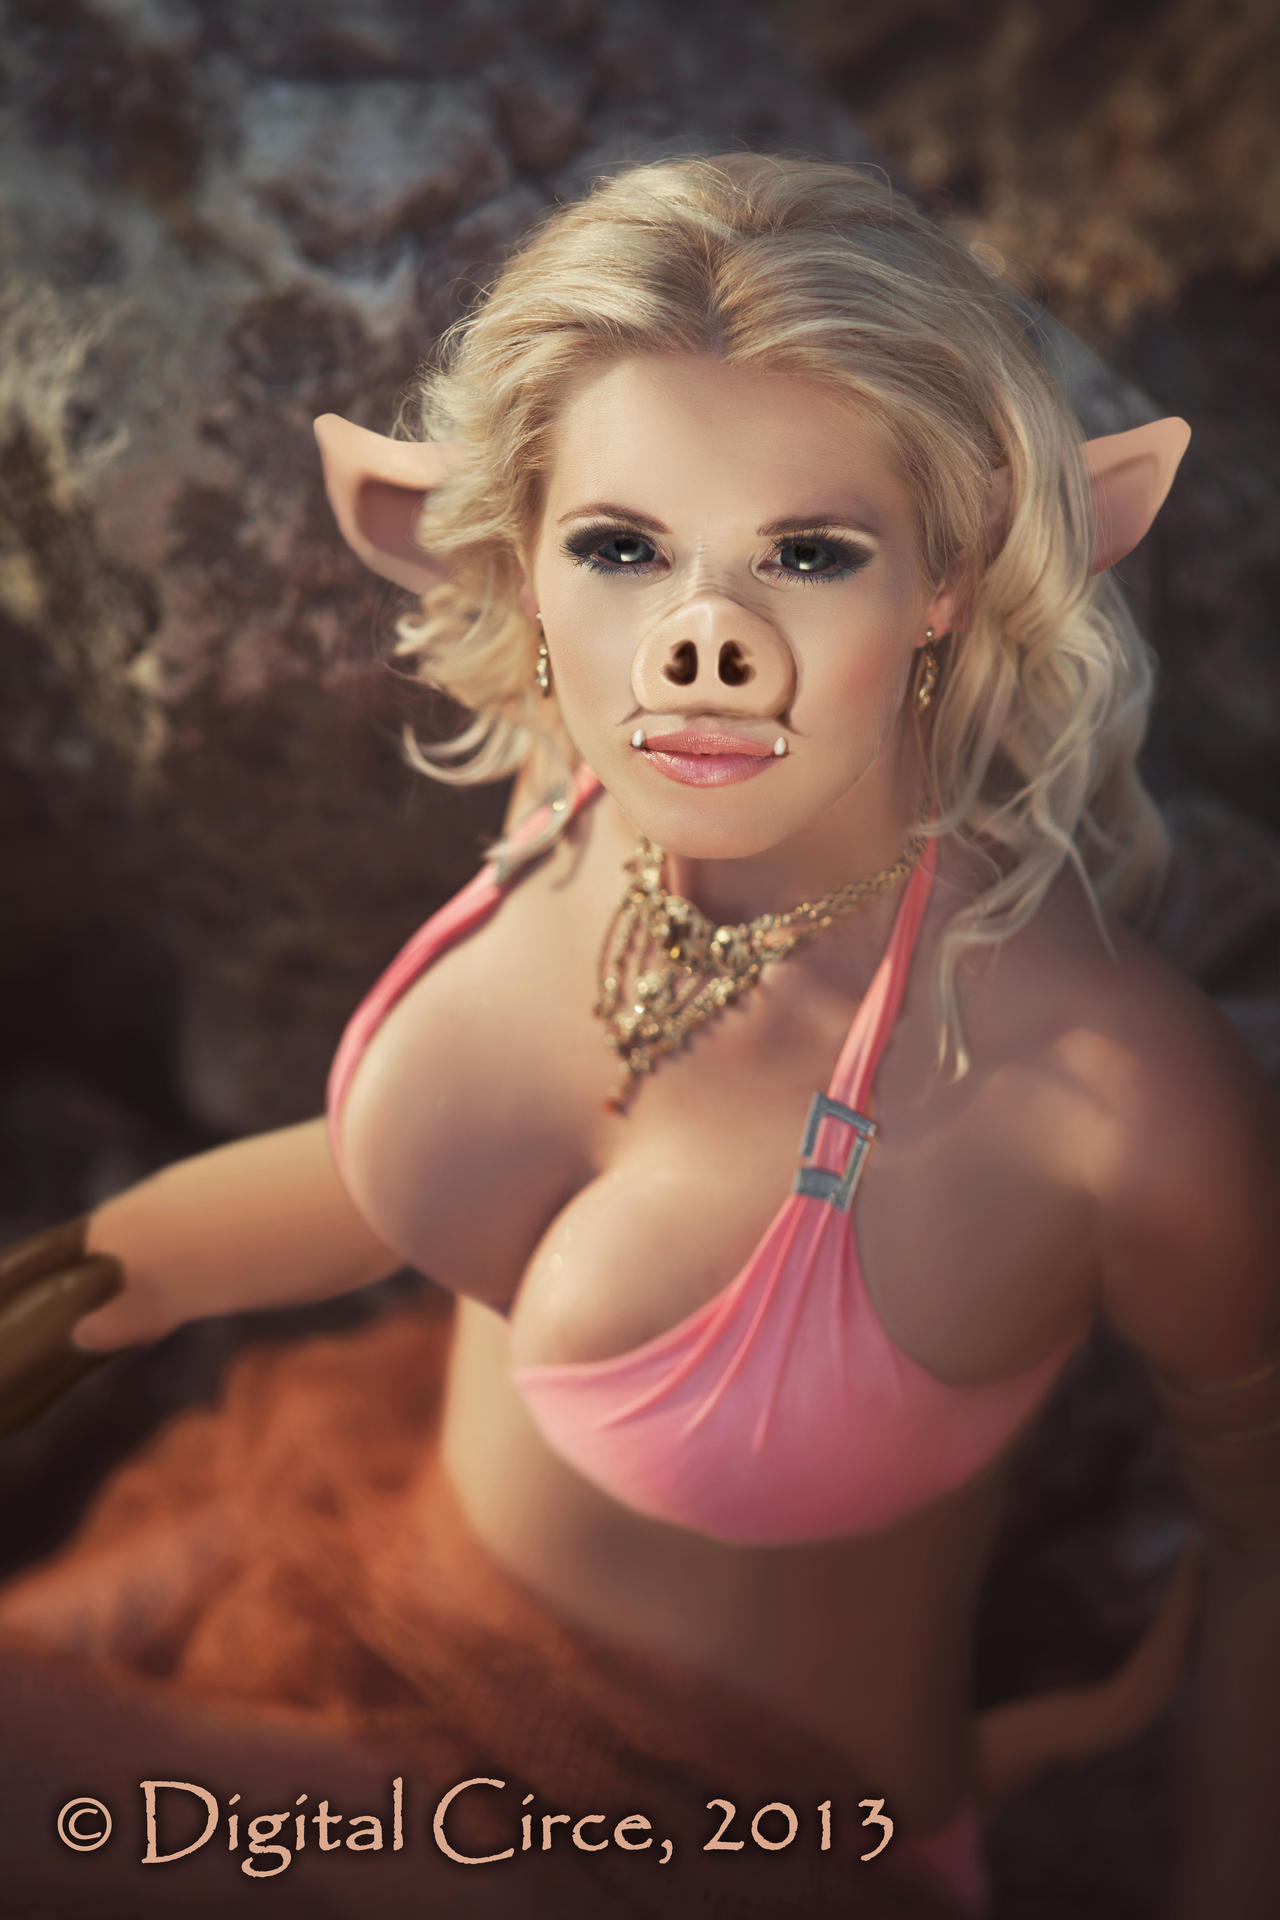 Pig Girl TF 5 by Anymouse-68 on DeviantArt